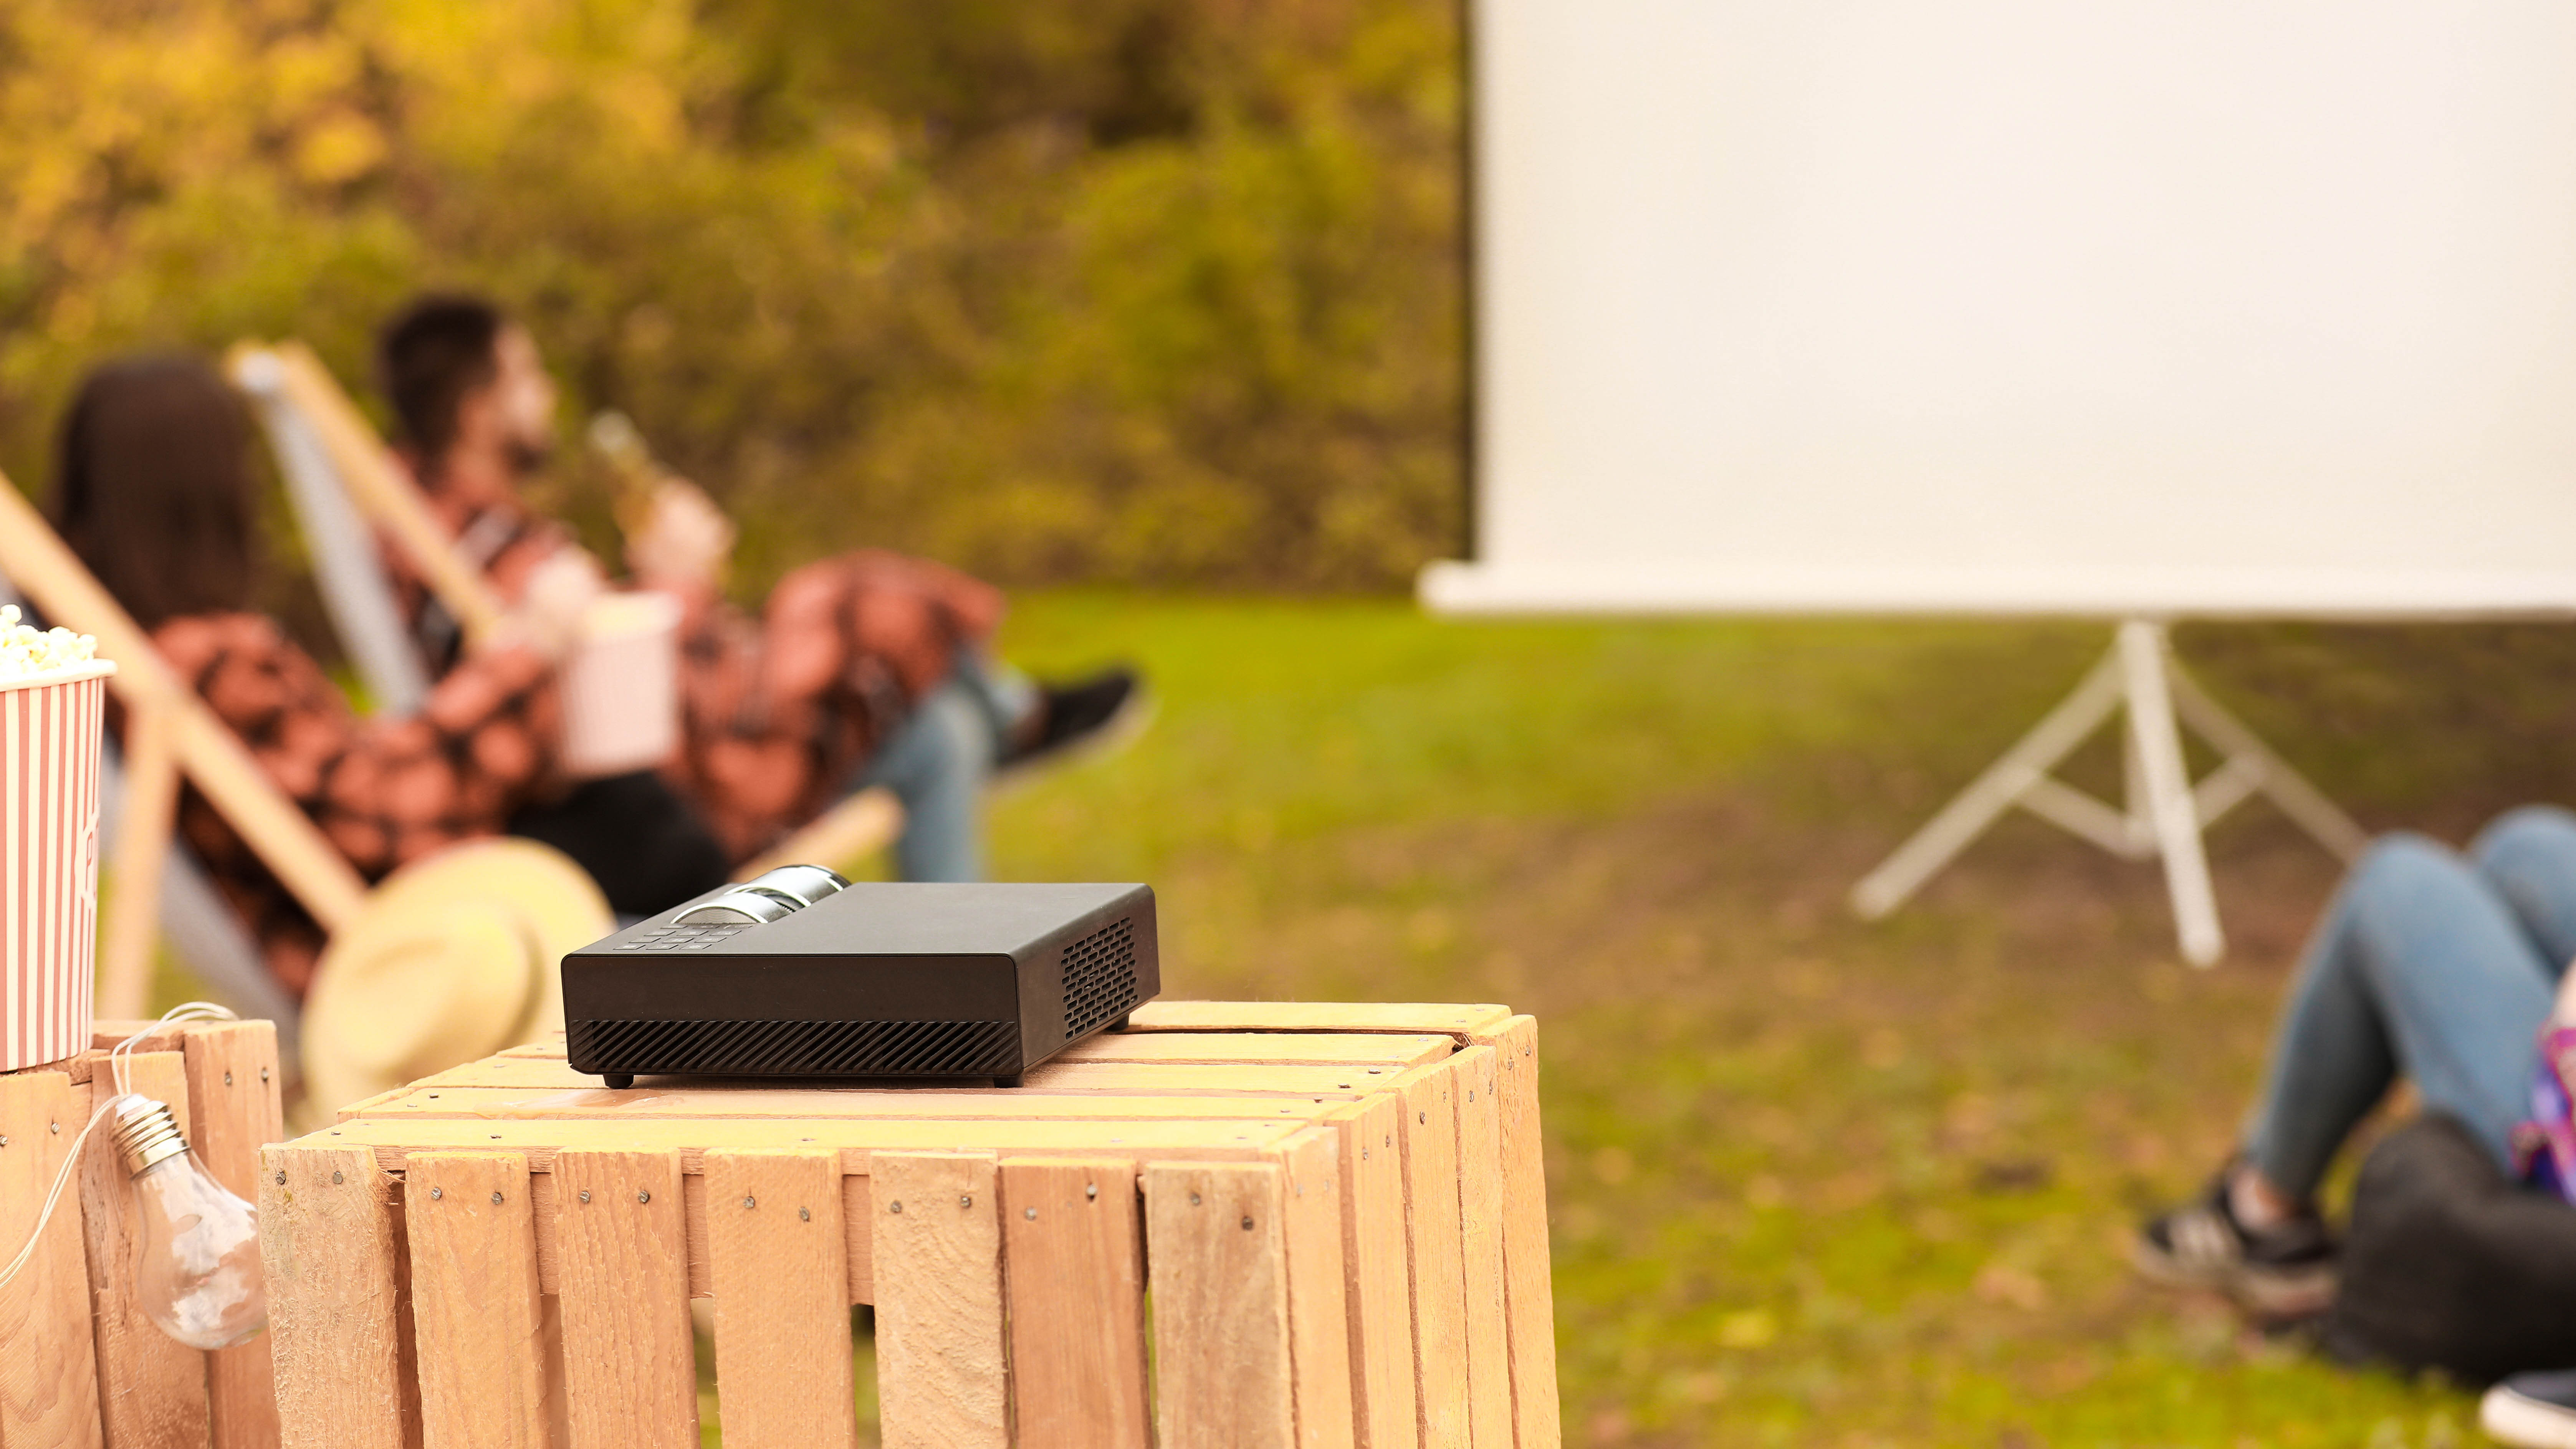 Backyard theater outdoor projector